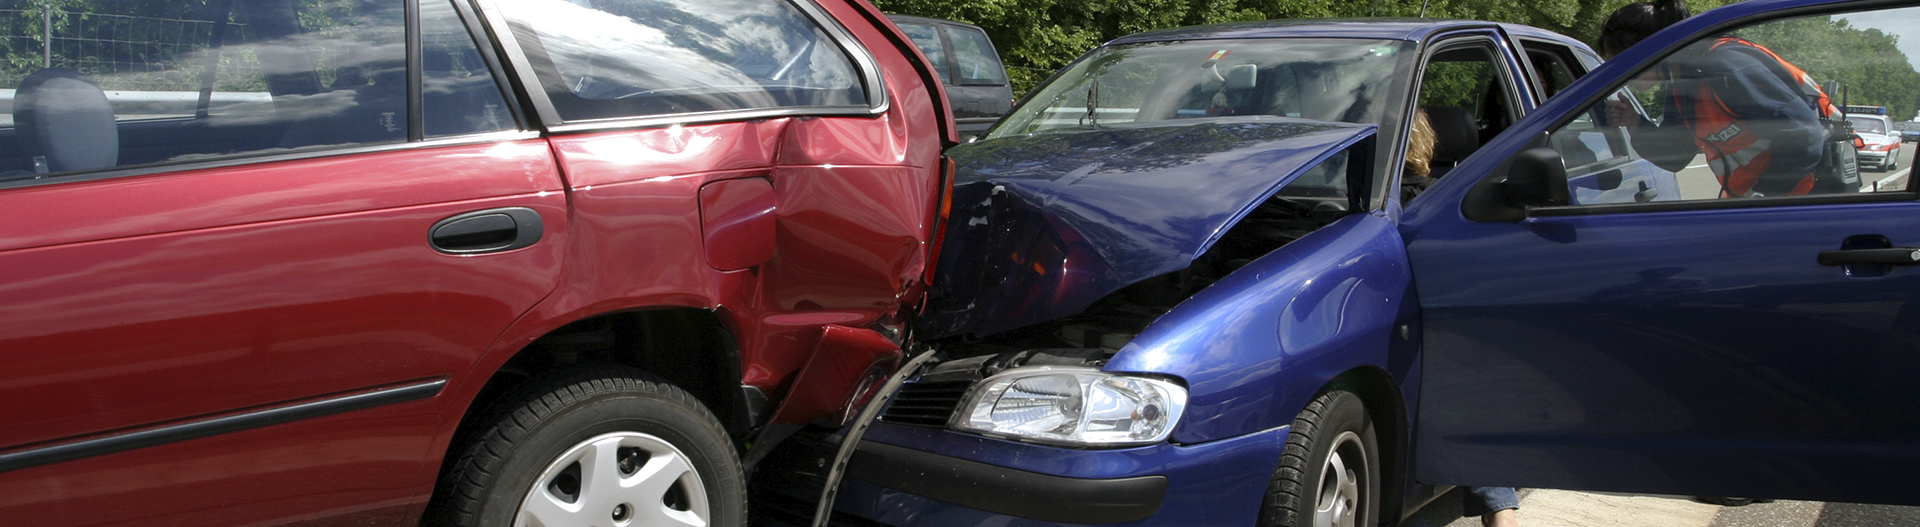 Virginia Automobile Accident Lawyers